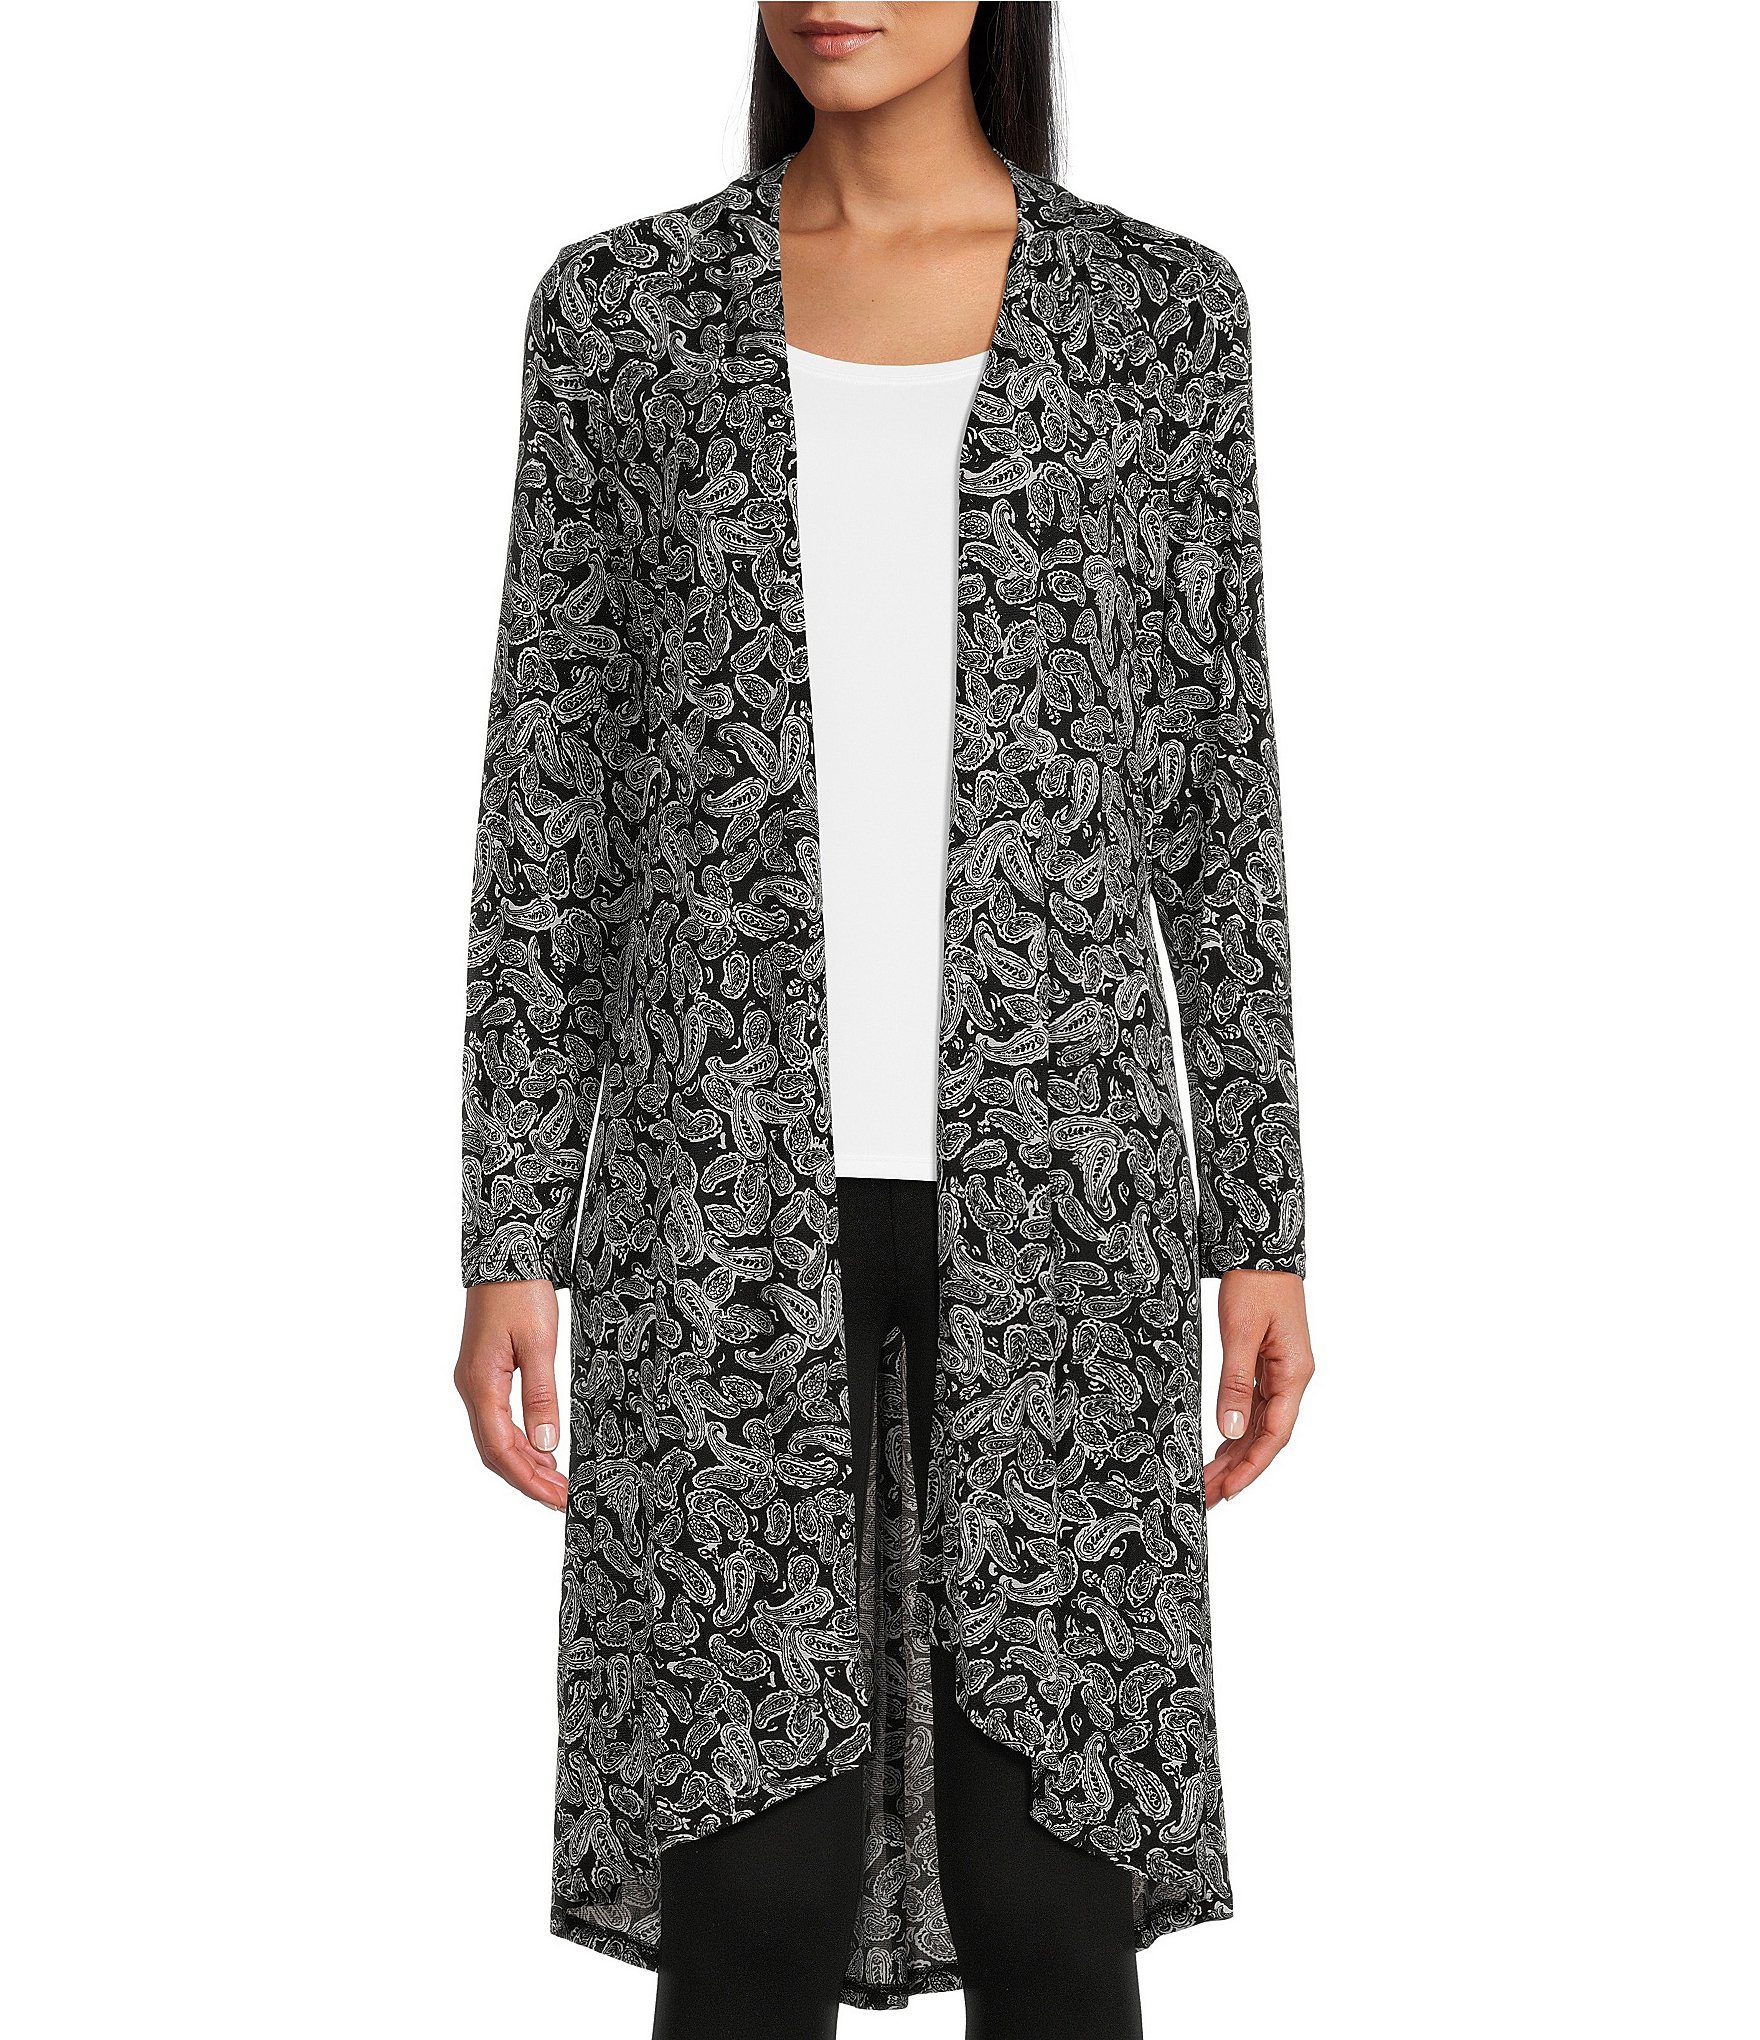 Snake Print Duster, Snake Print Pieces for Women Over 40